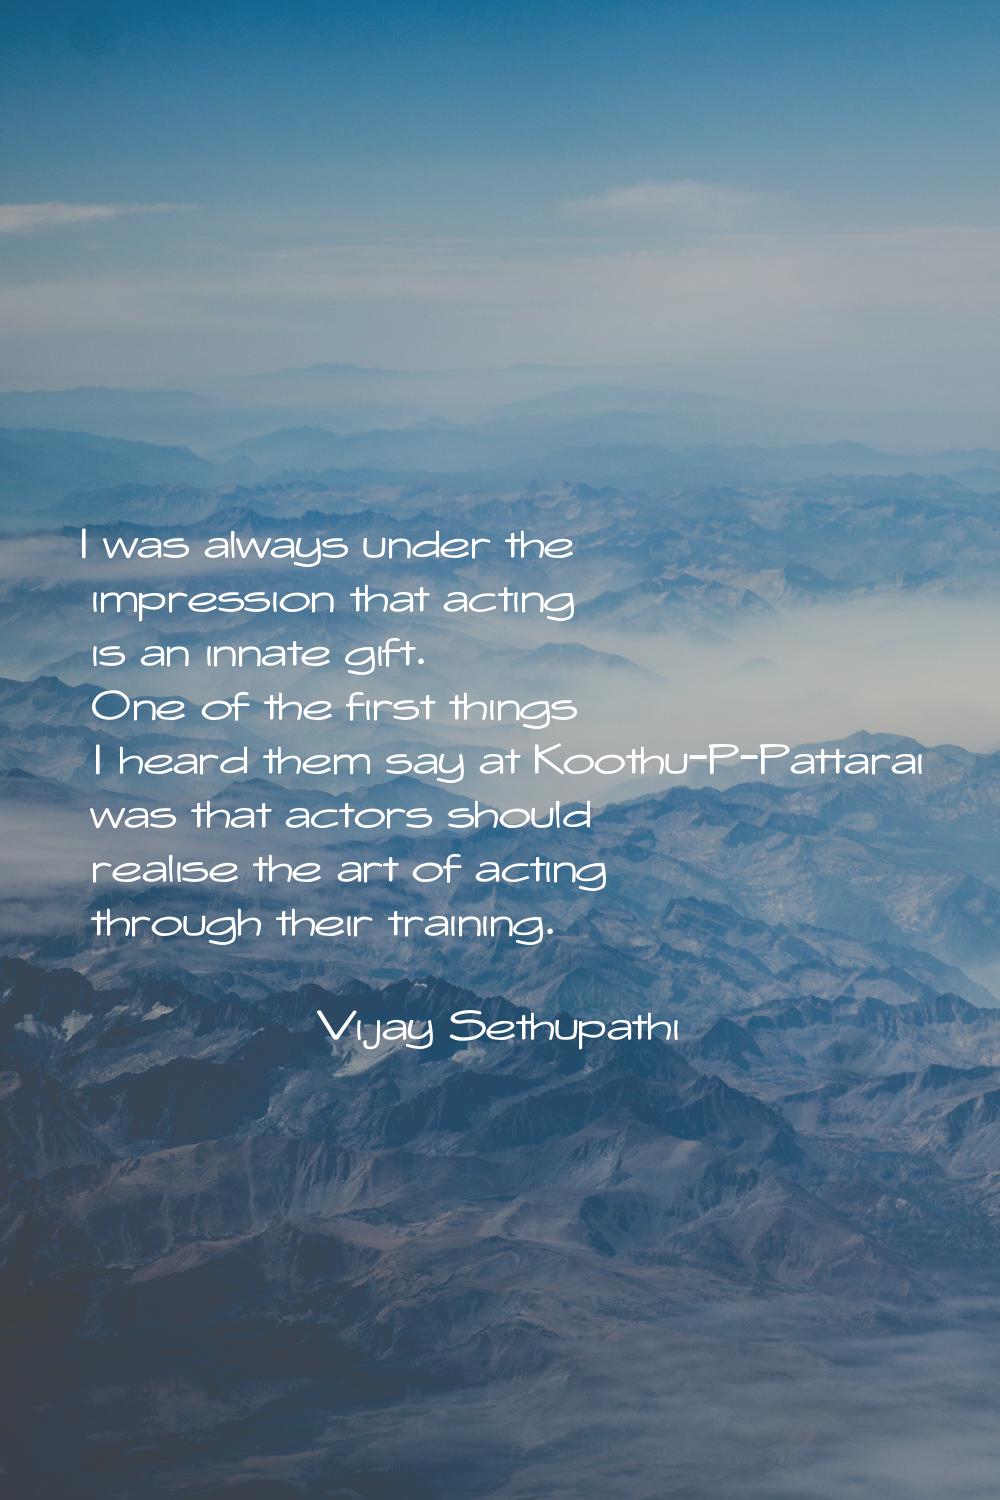 I was always under the impression that acting is an innate gift. One of the first things I heard th